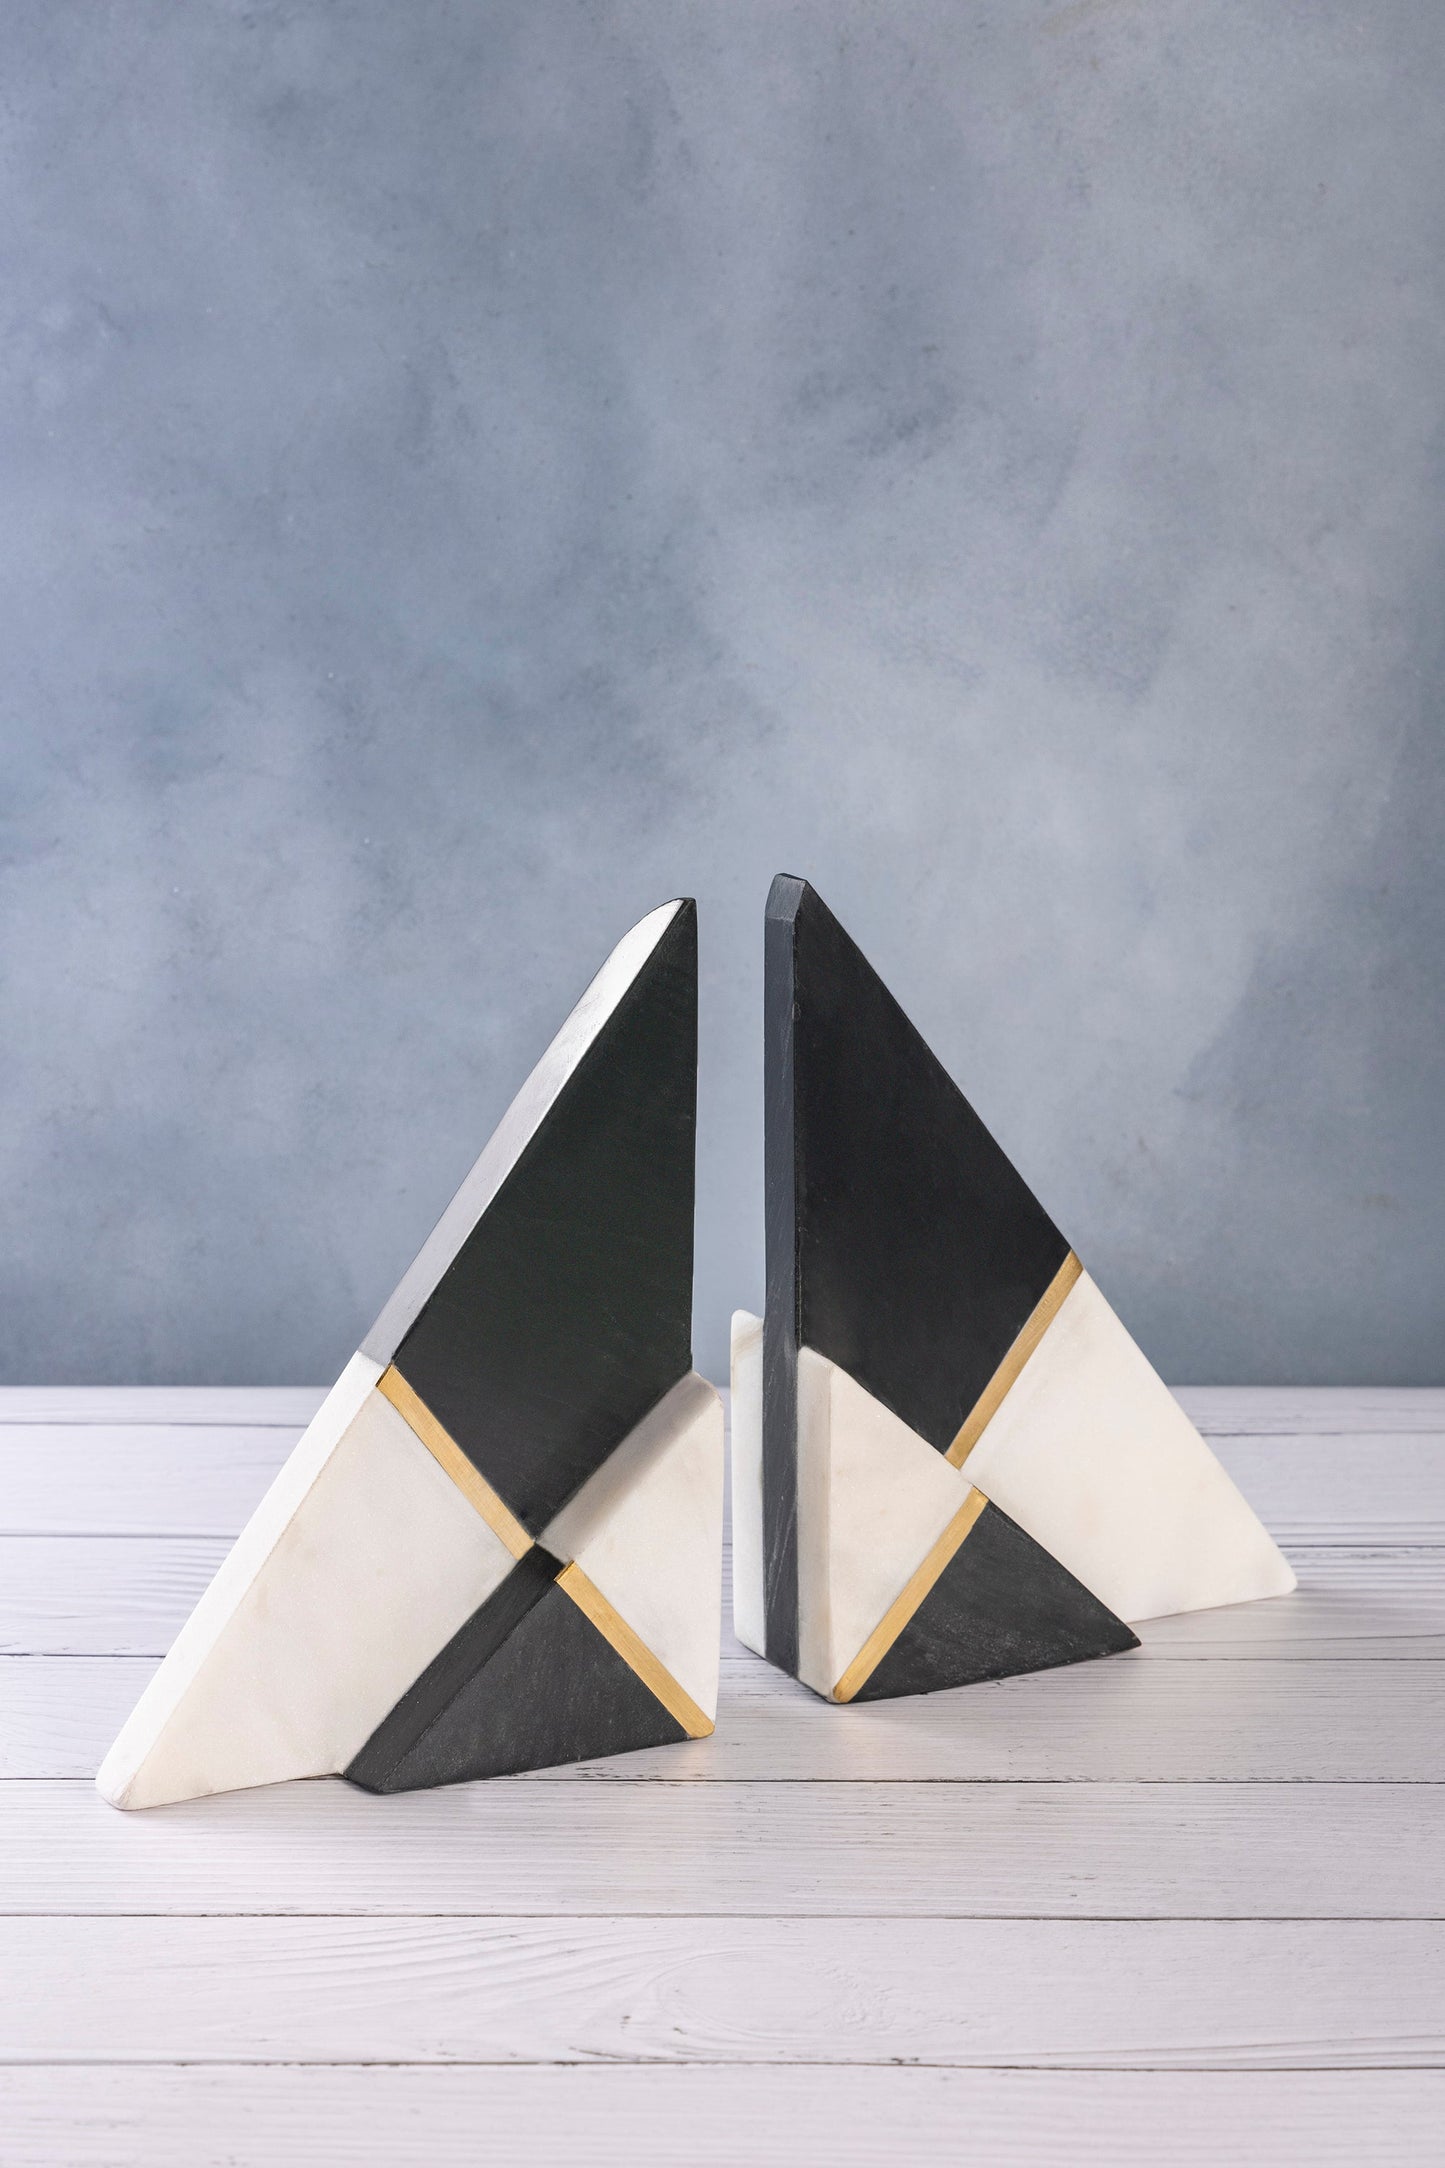 Kaavin Marble Bookends, Set of 2 (6" x 2.75" x 2.5" )